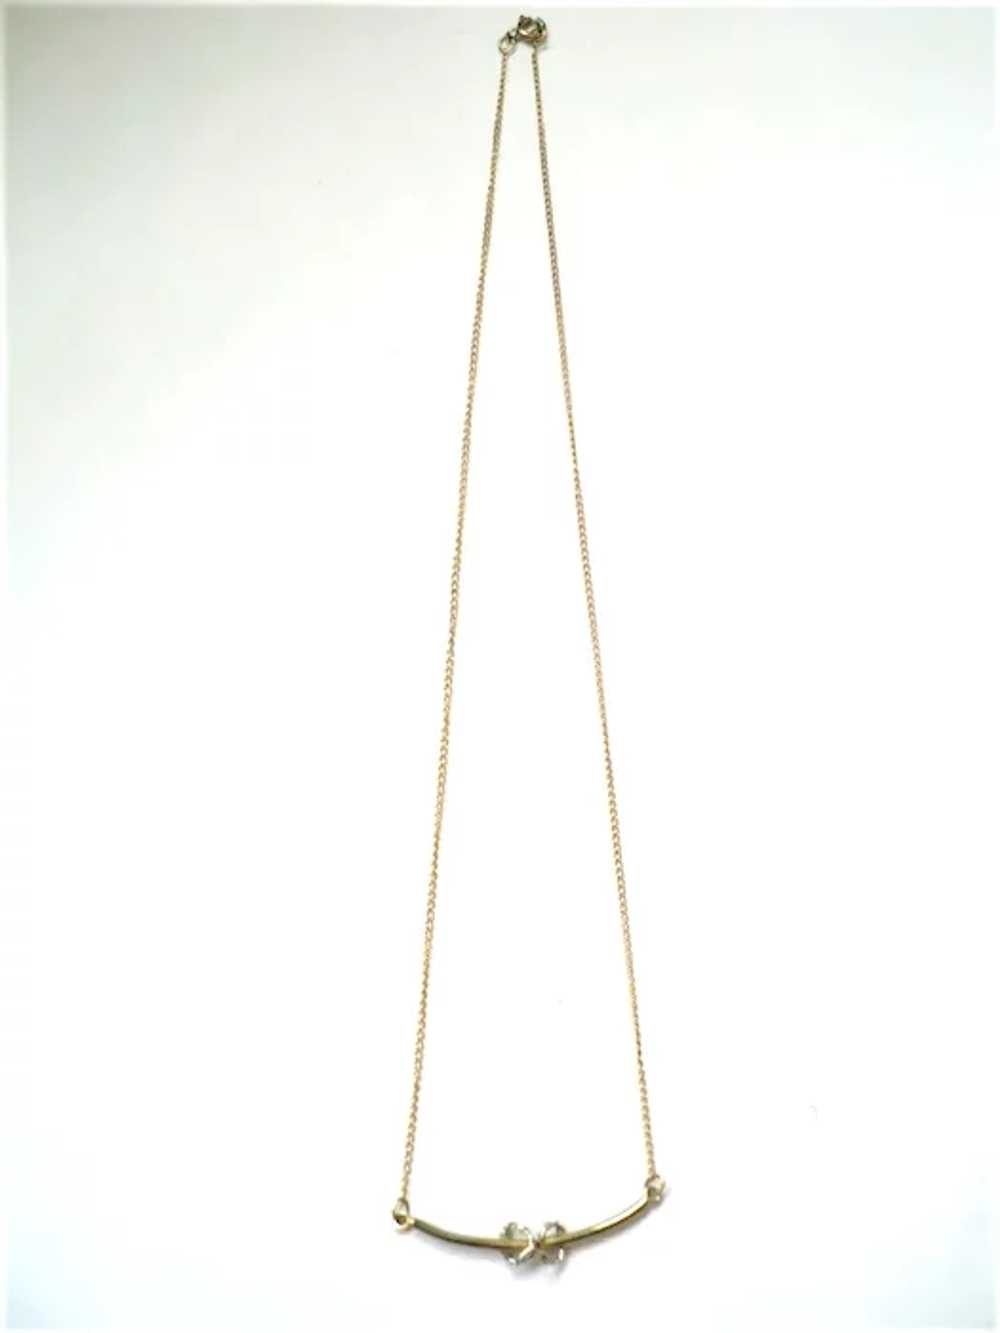 Vtg. Gold Fill Love Knot Necklace Gold & Silver - image 5